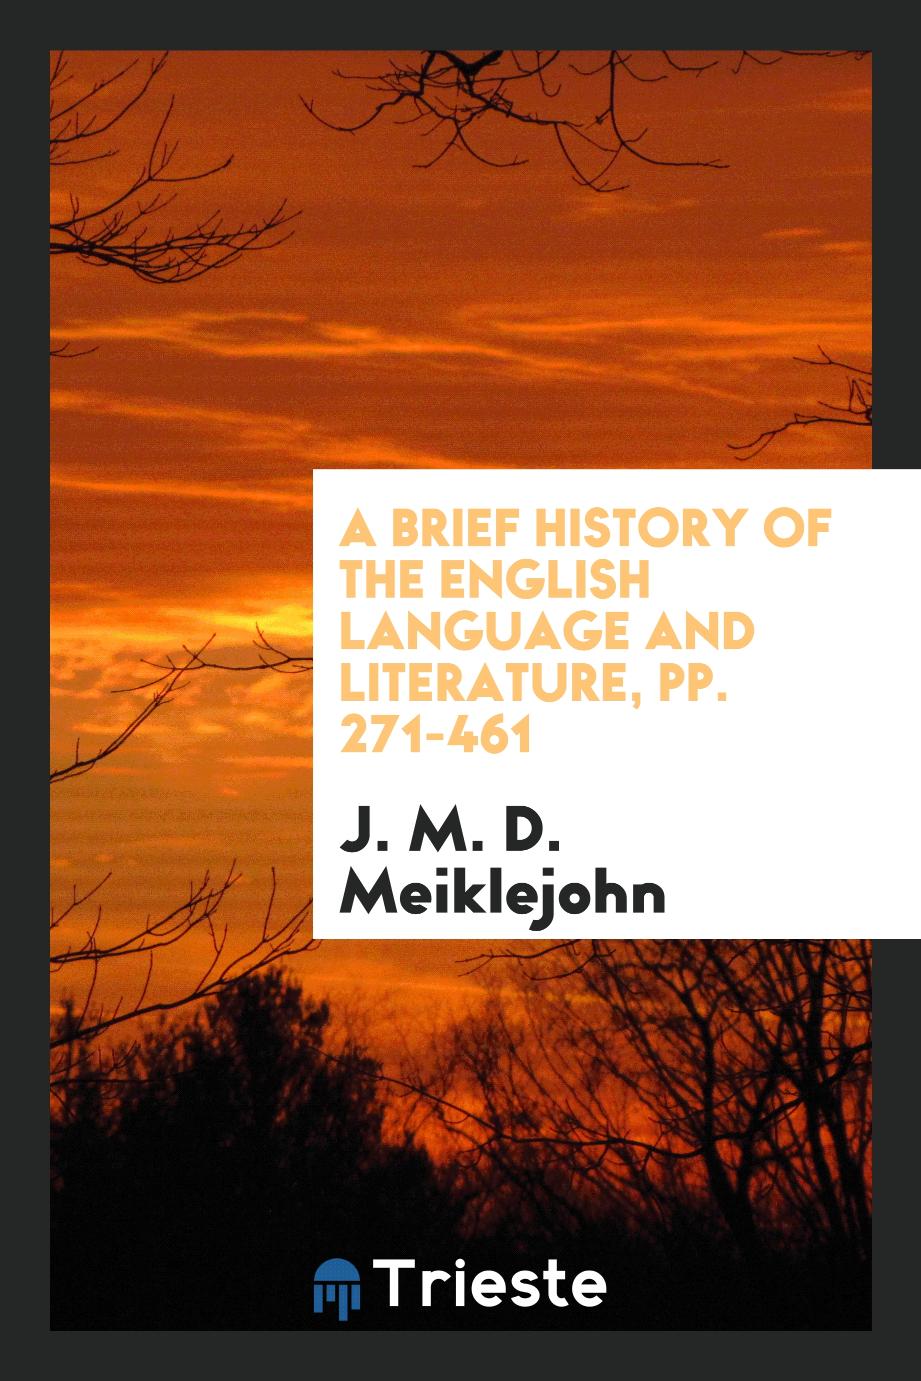 A Brief History of the English Language and Literature, pp. 271-461